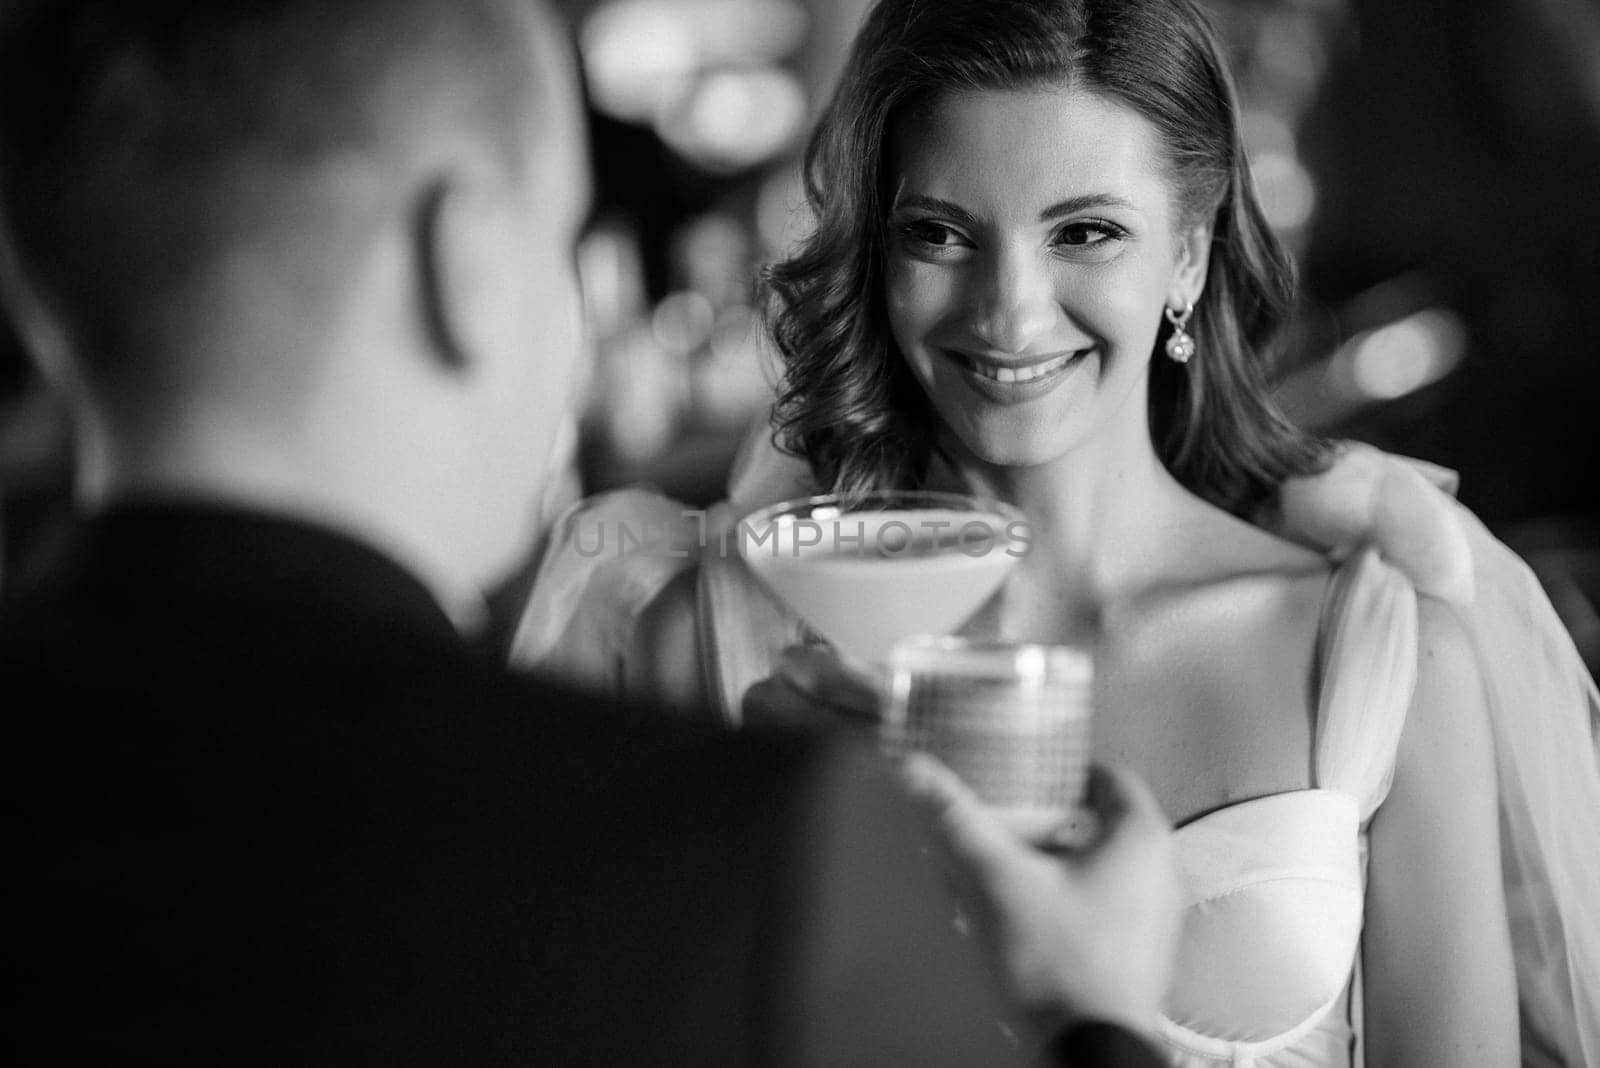 bride and groom inside a cocktail bar in a bright atmosphere with a glass of drink